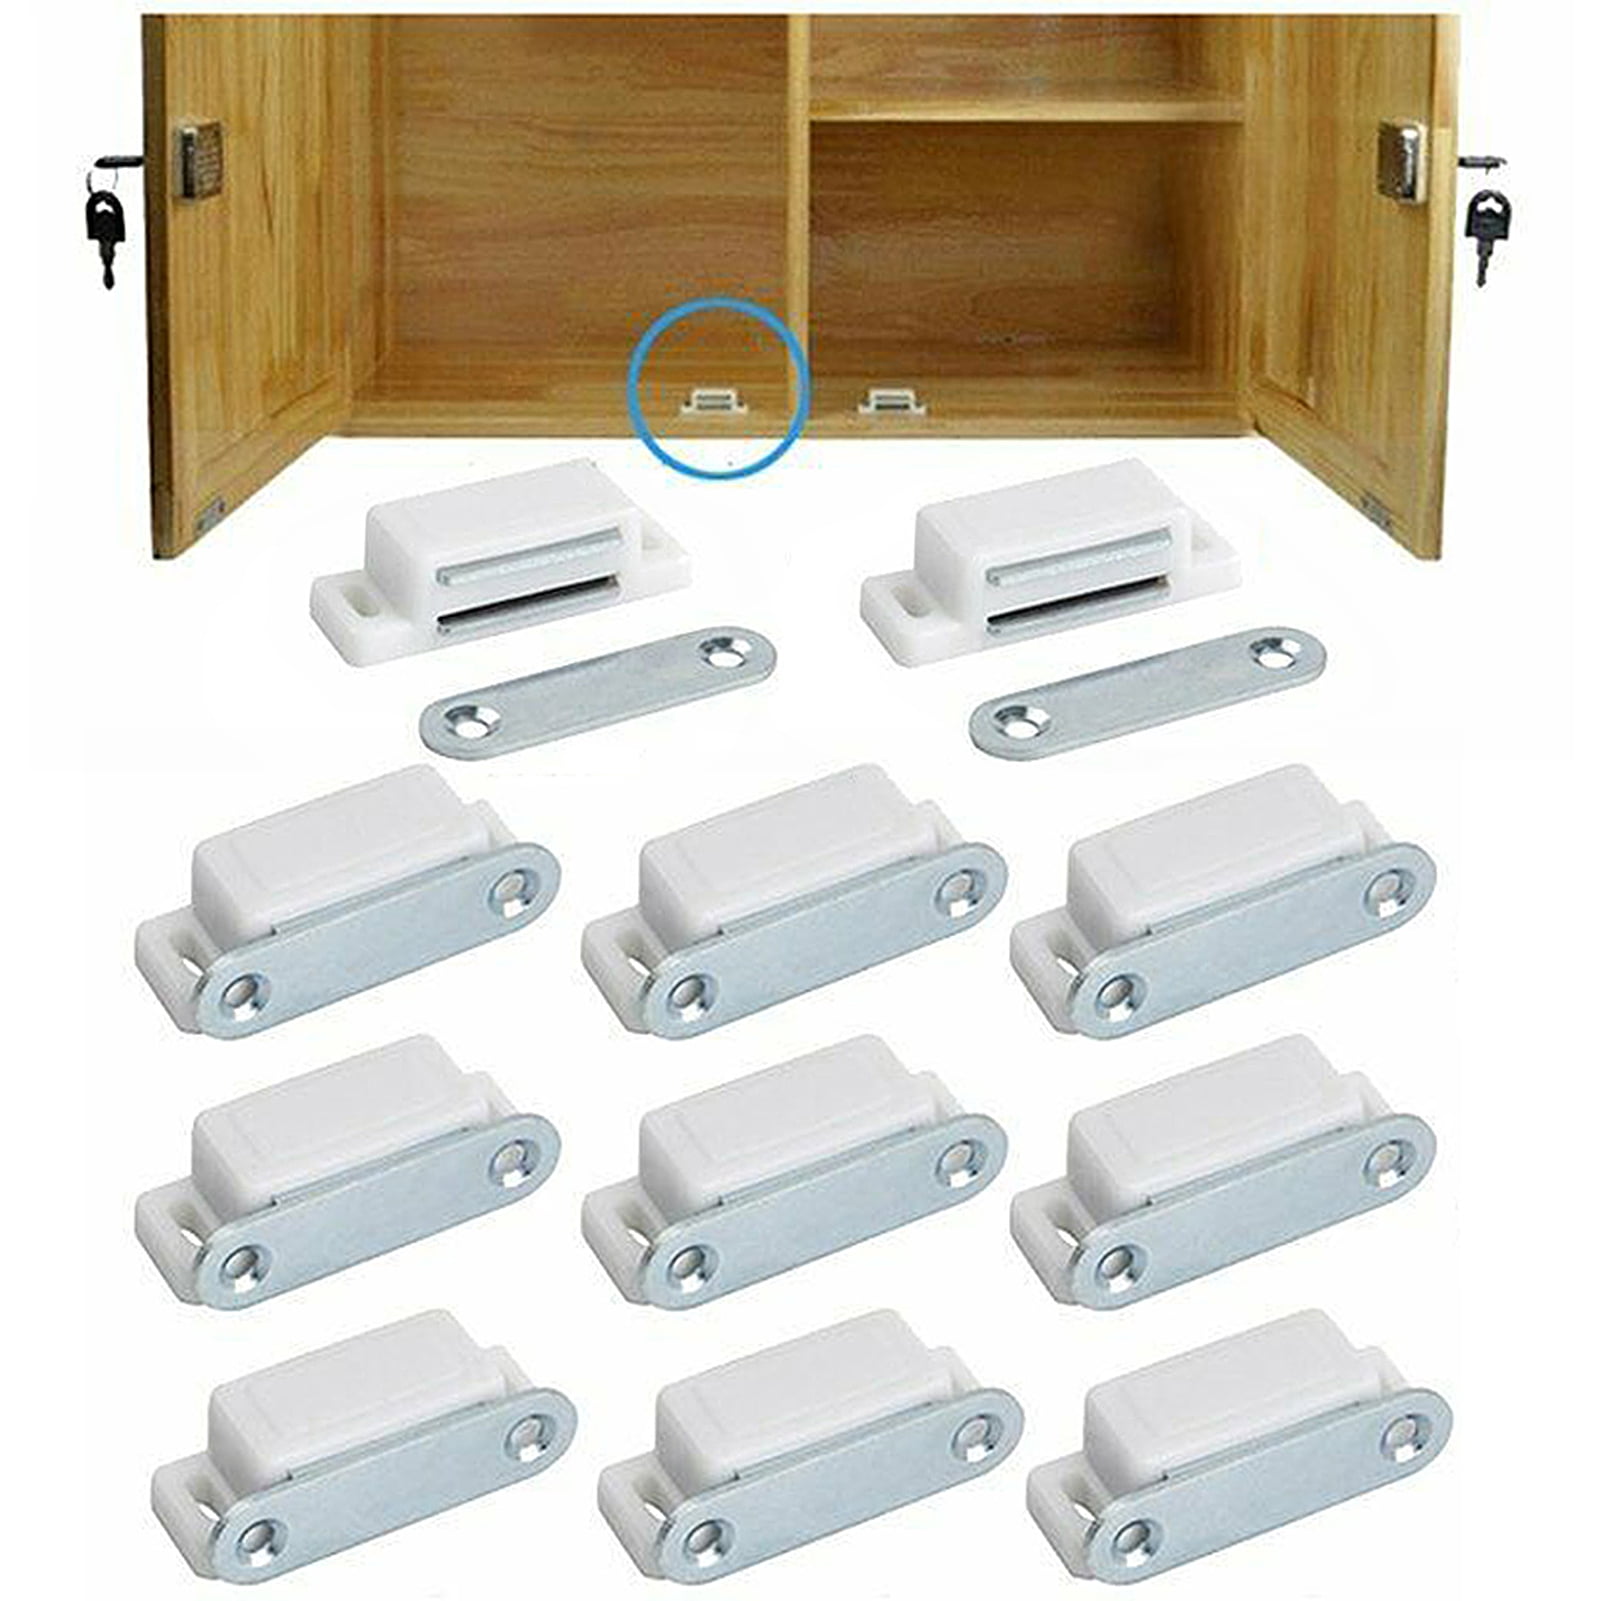 34pcs/set Multifunctional Child Safety Lock For Cabinet Door & Drawer With Magnetic  Locks, Keys And Installation Brackets Included